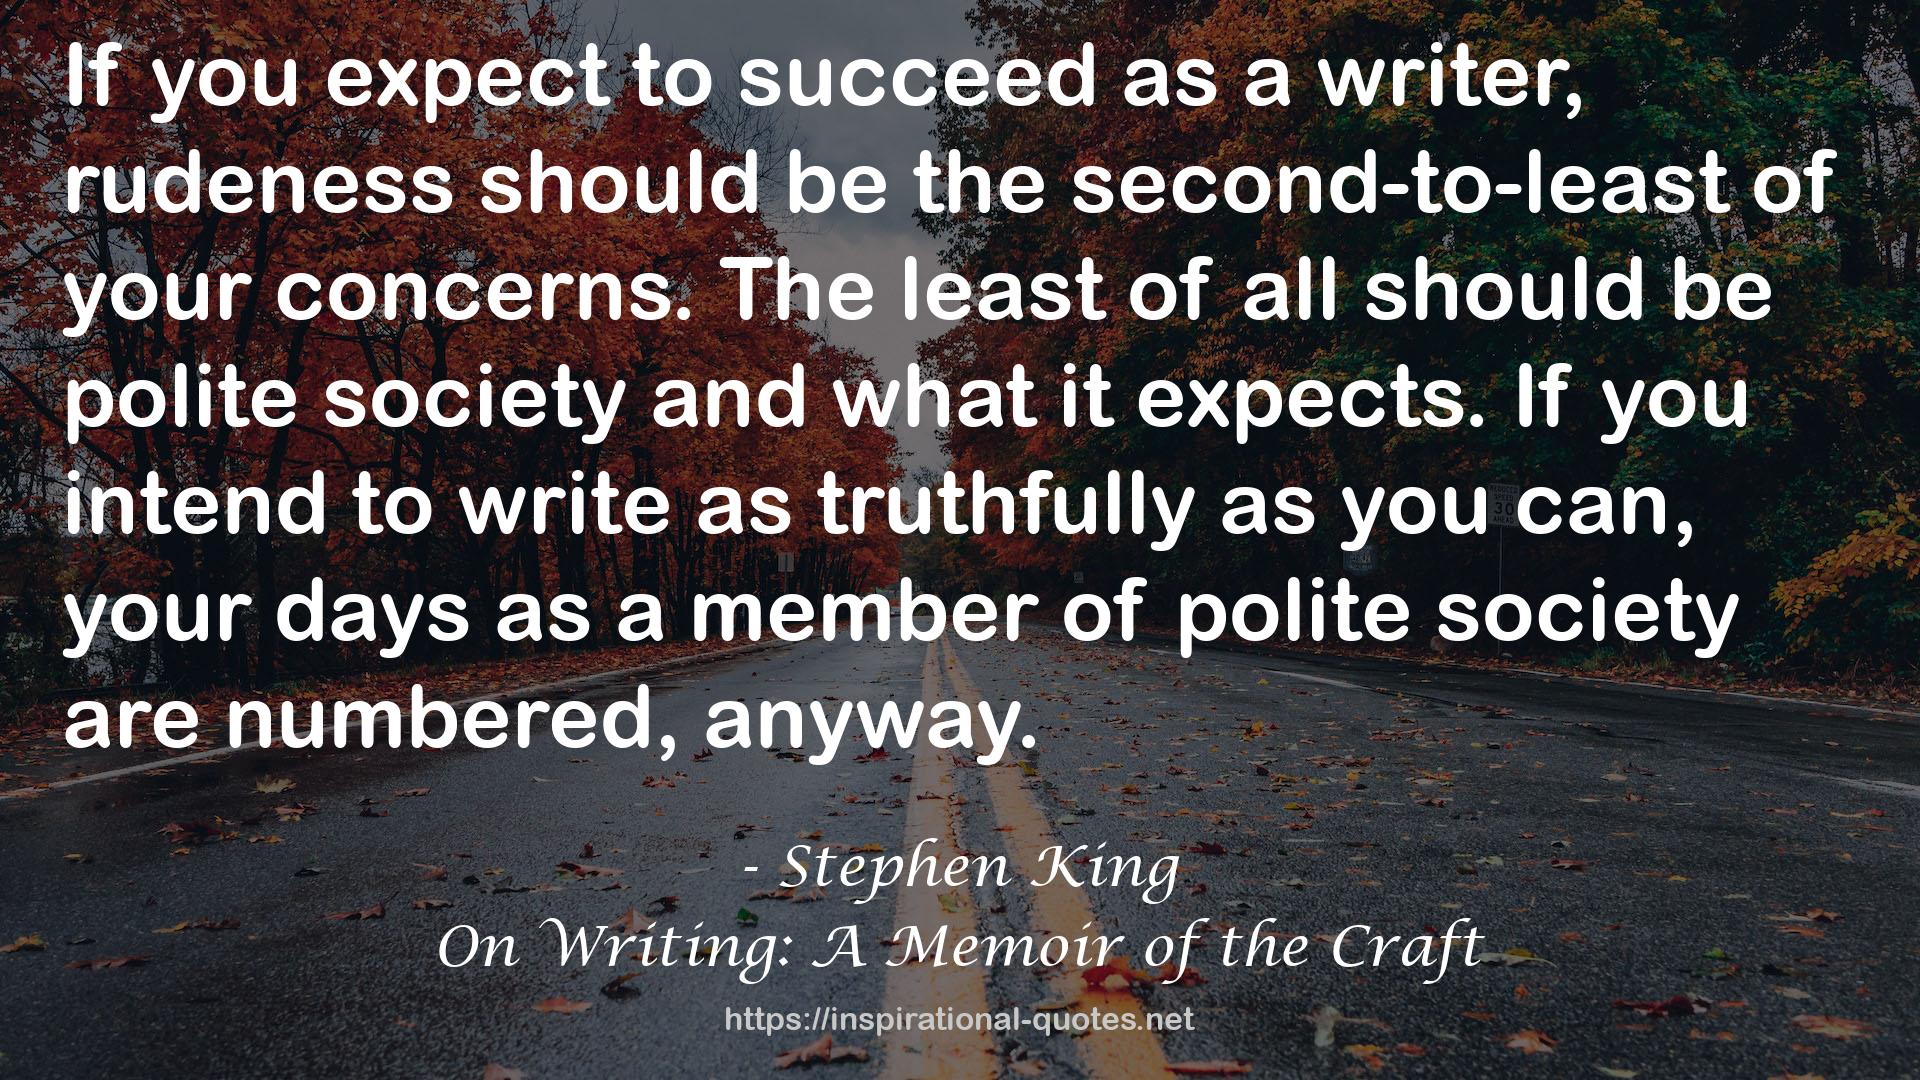 Stephen King QUOTES